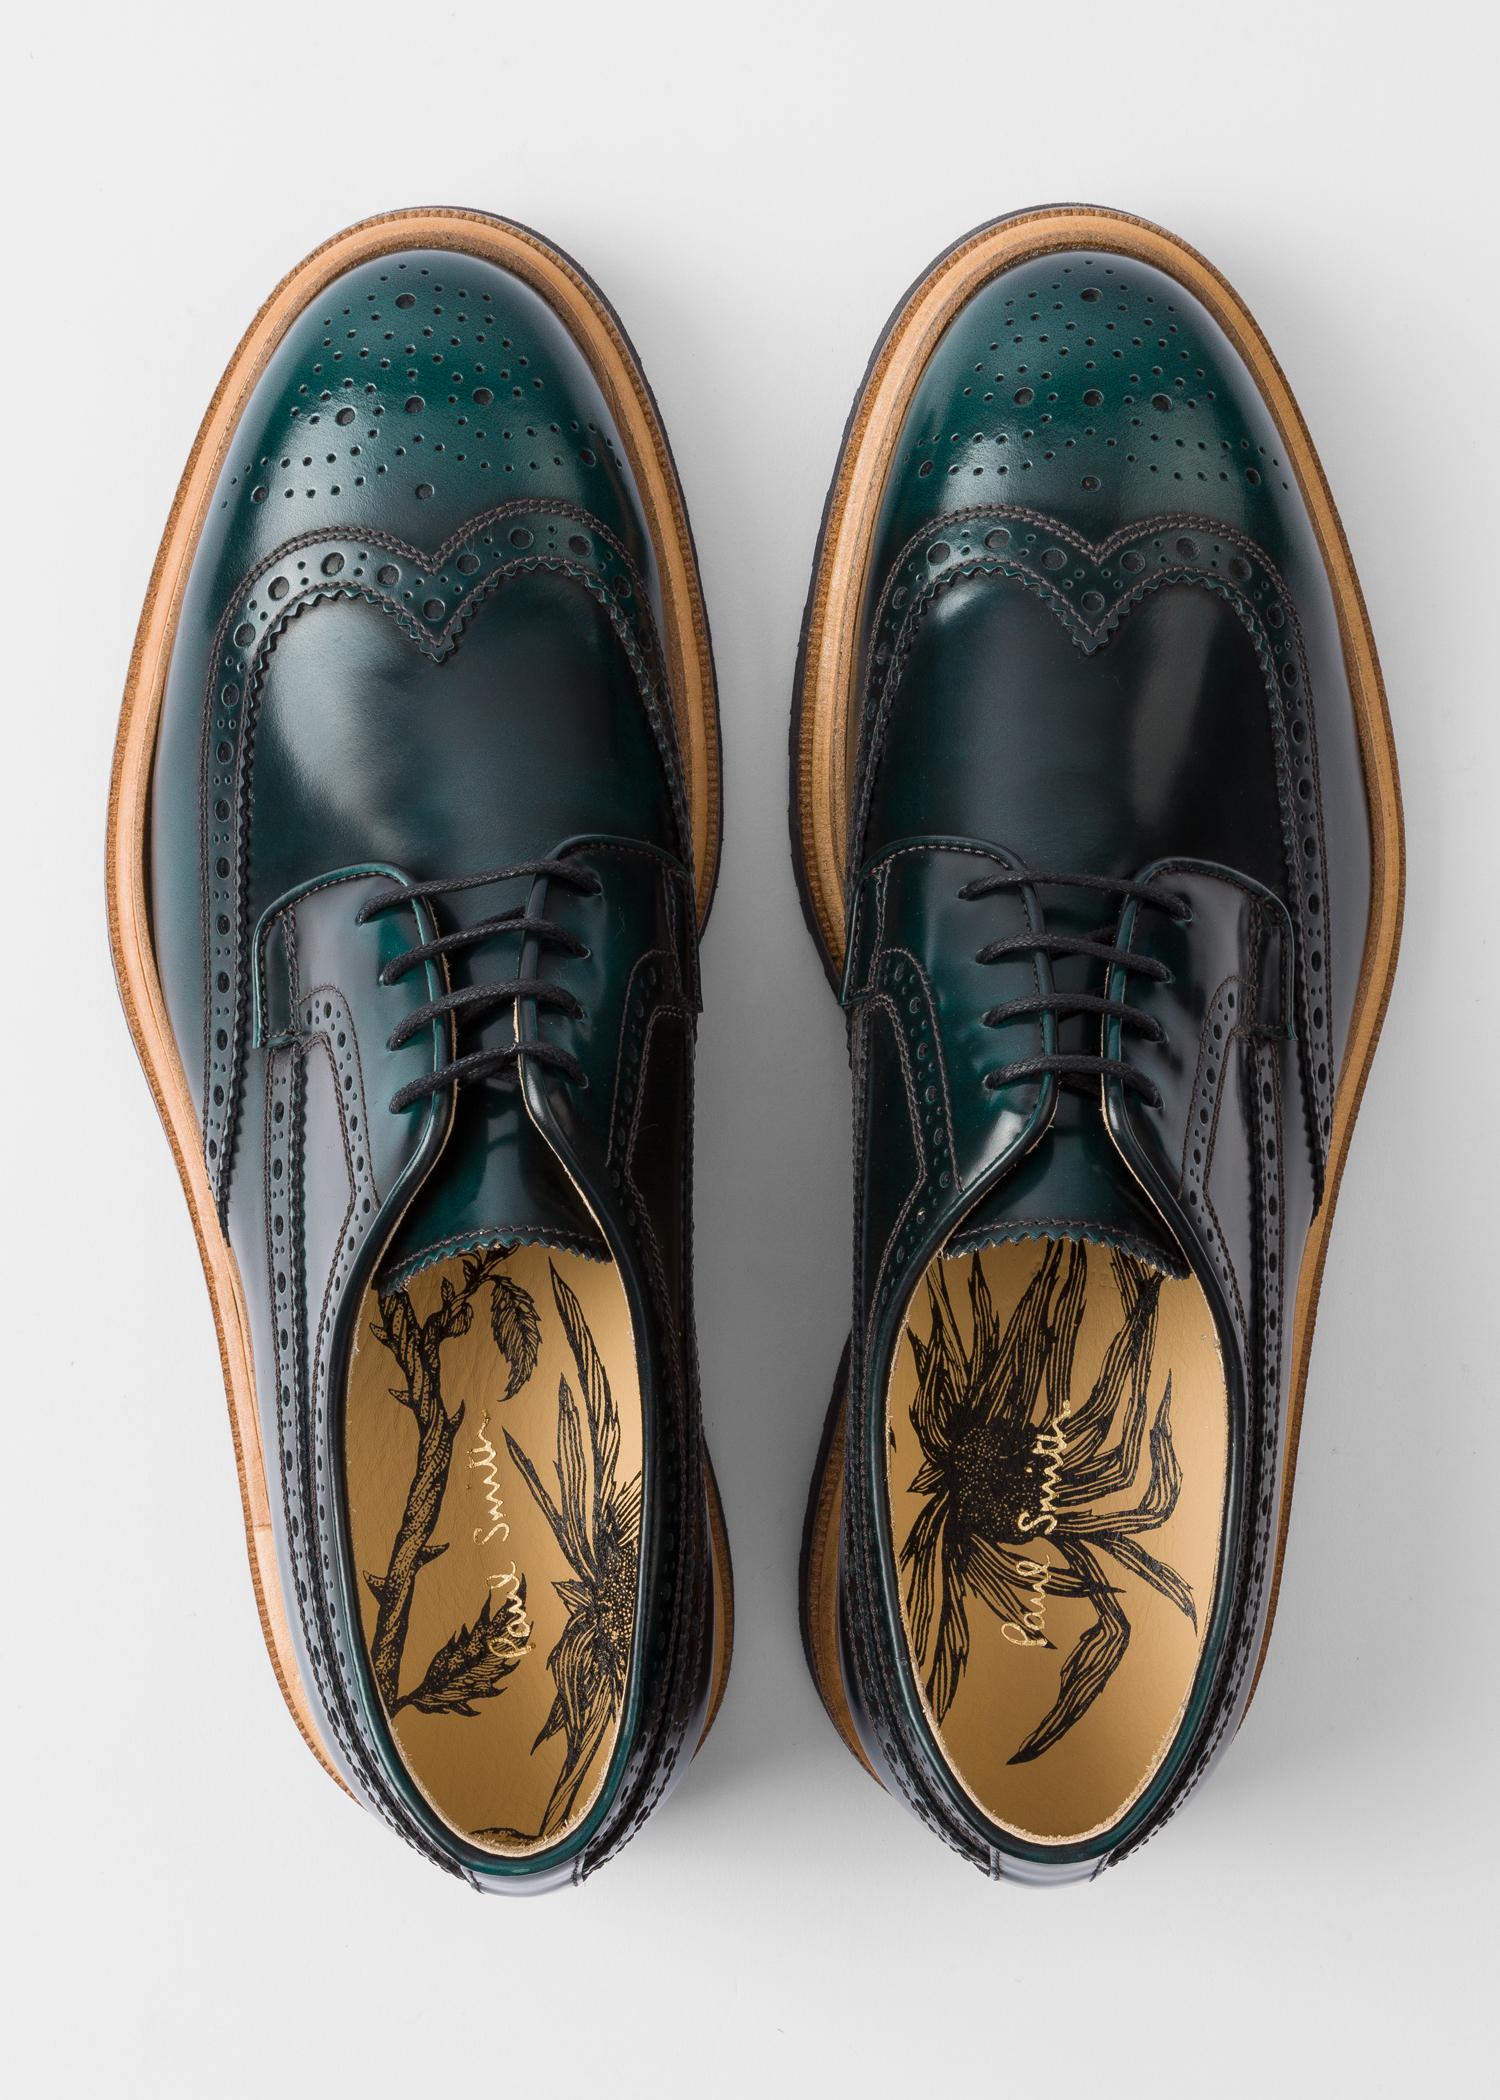 Paul Smith Leather Bottle Green 'crispin' Brogues for Men - Lyst